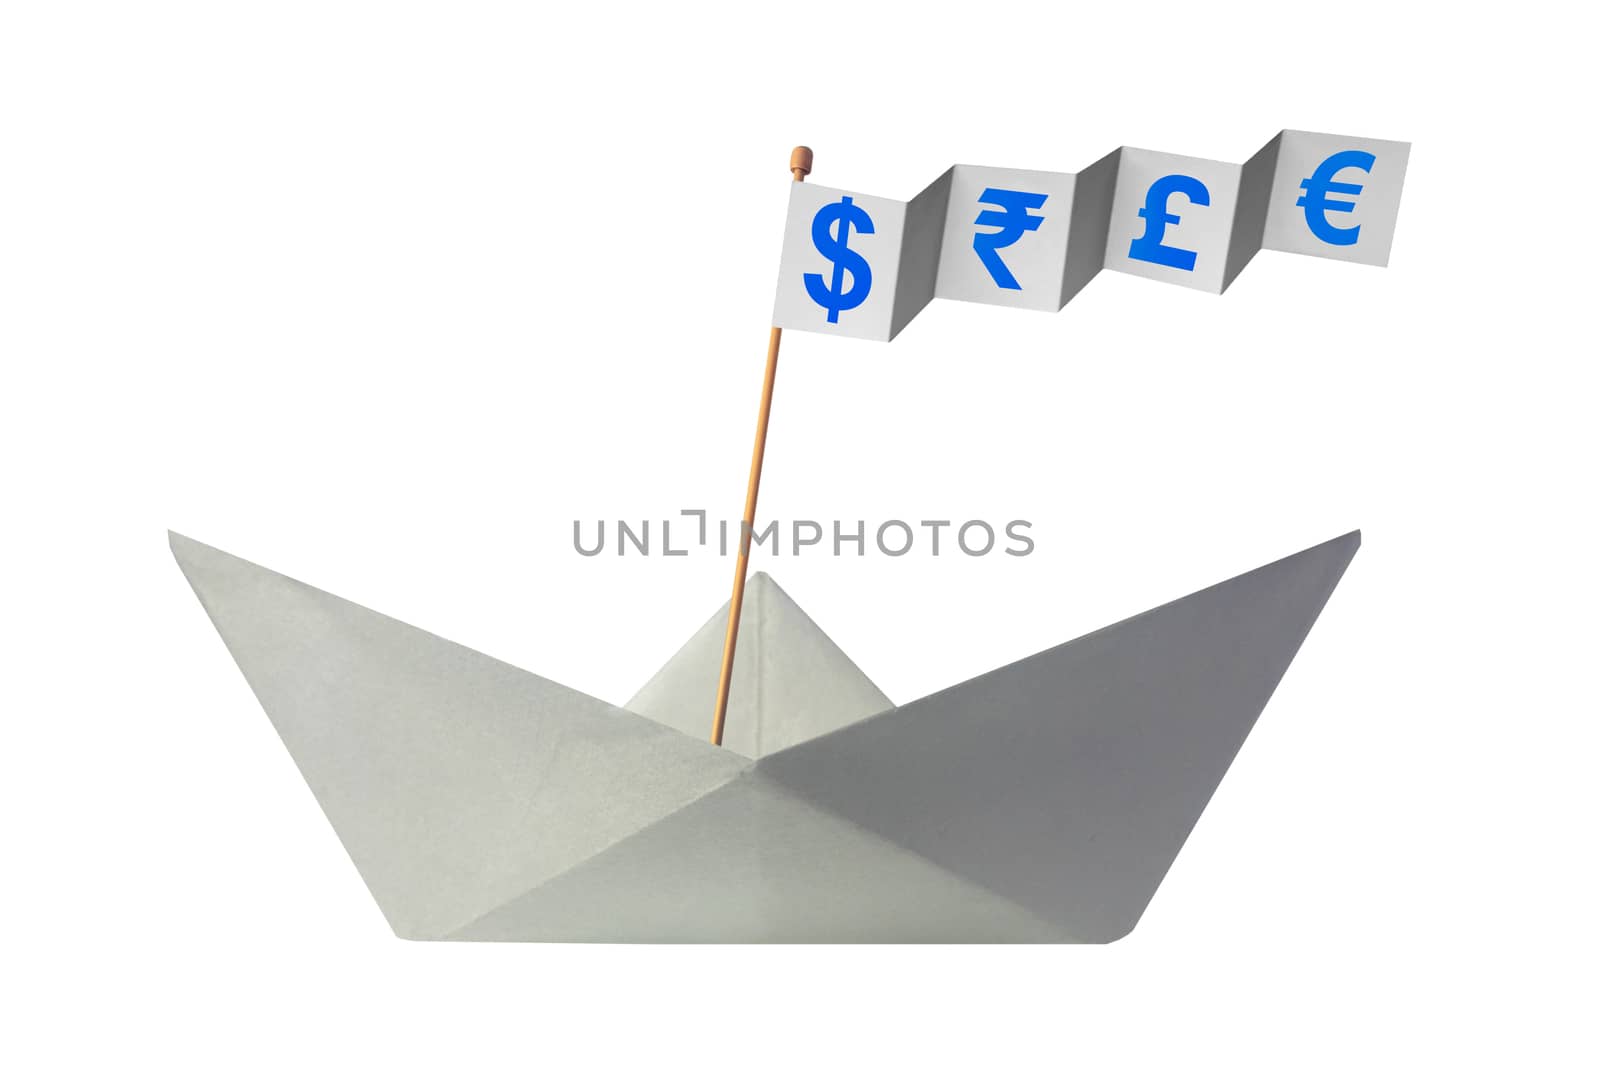 Origami paper boat with flag writing different currency signs by yands